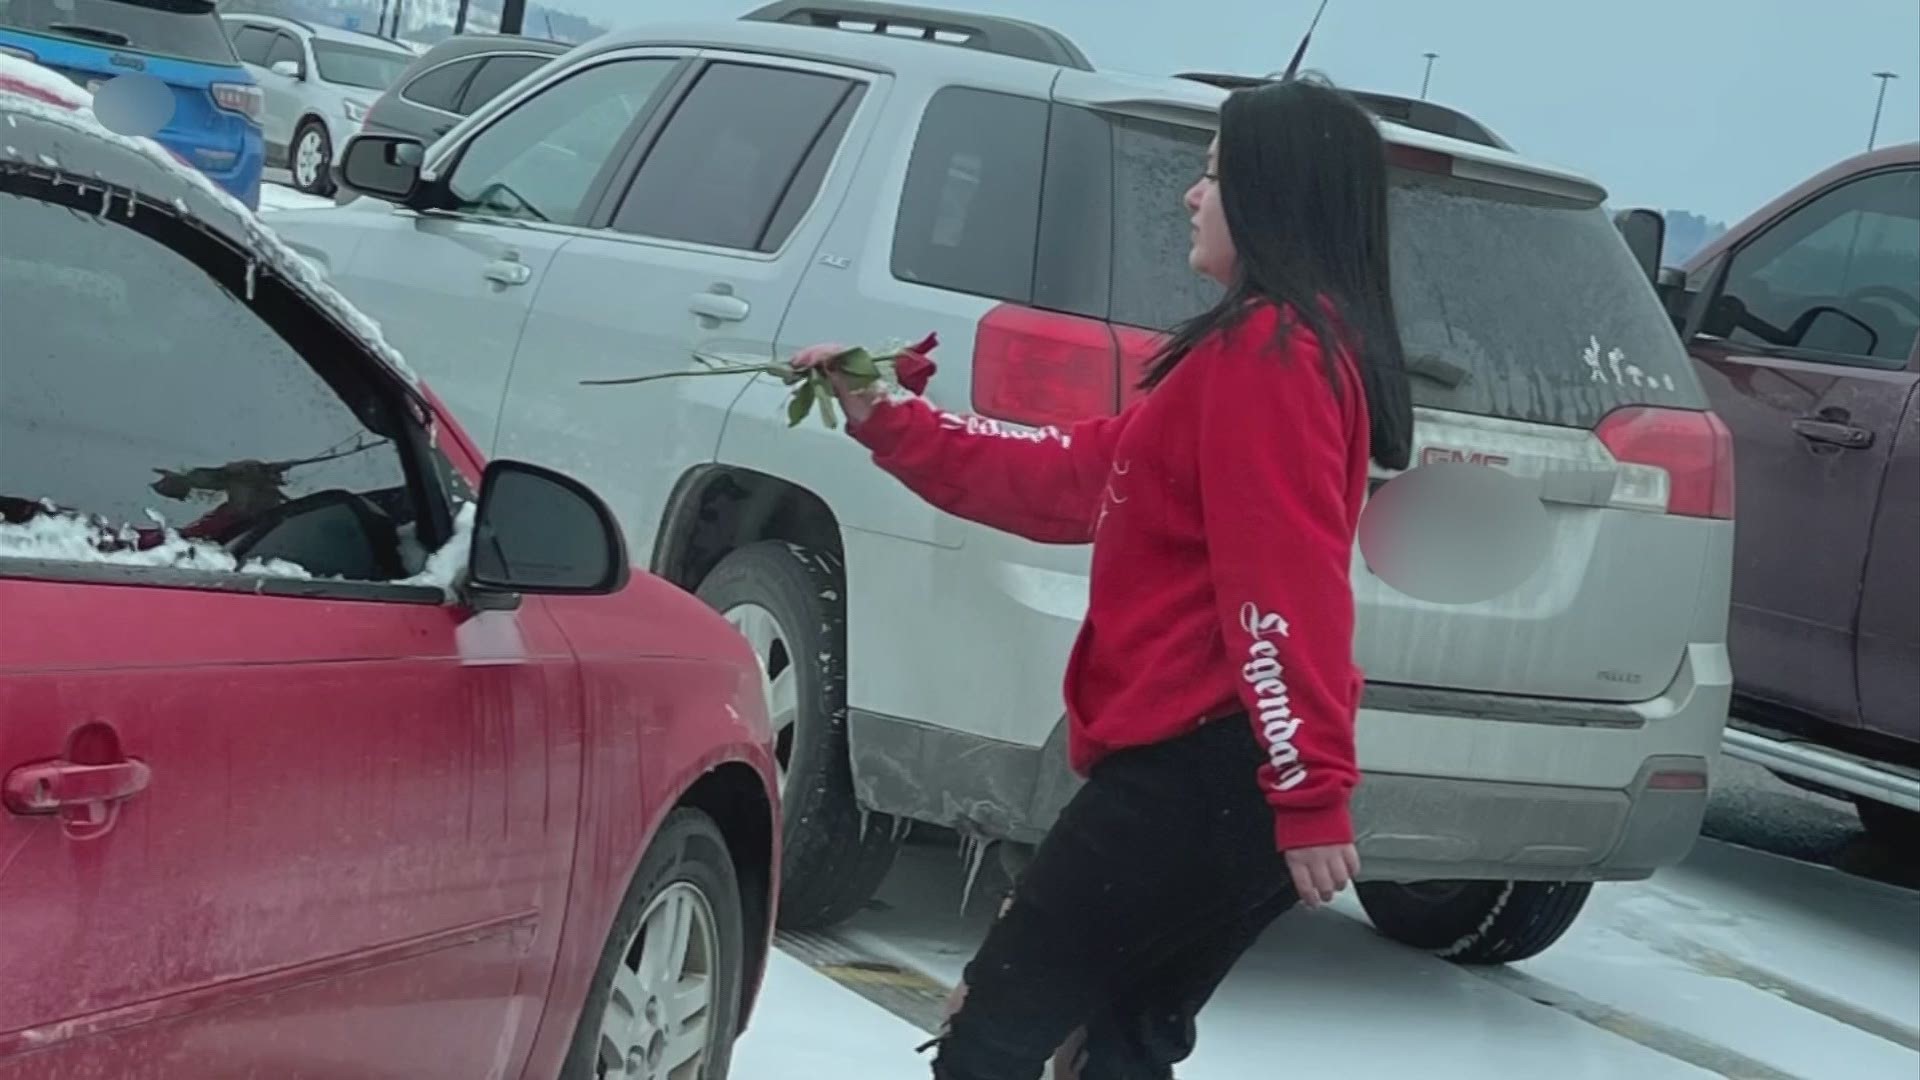 Dozens of roses were left on vehicles, leading people to call the sheriff’s office, which issued a warning about a potential tie to human trafficking.